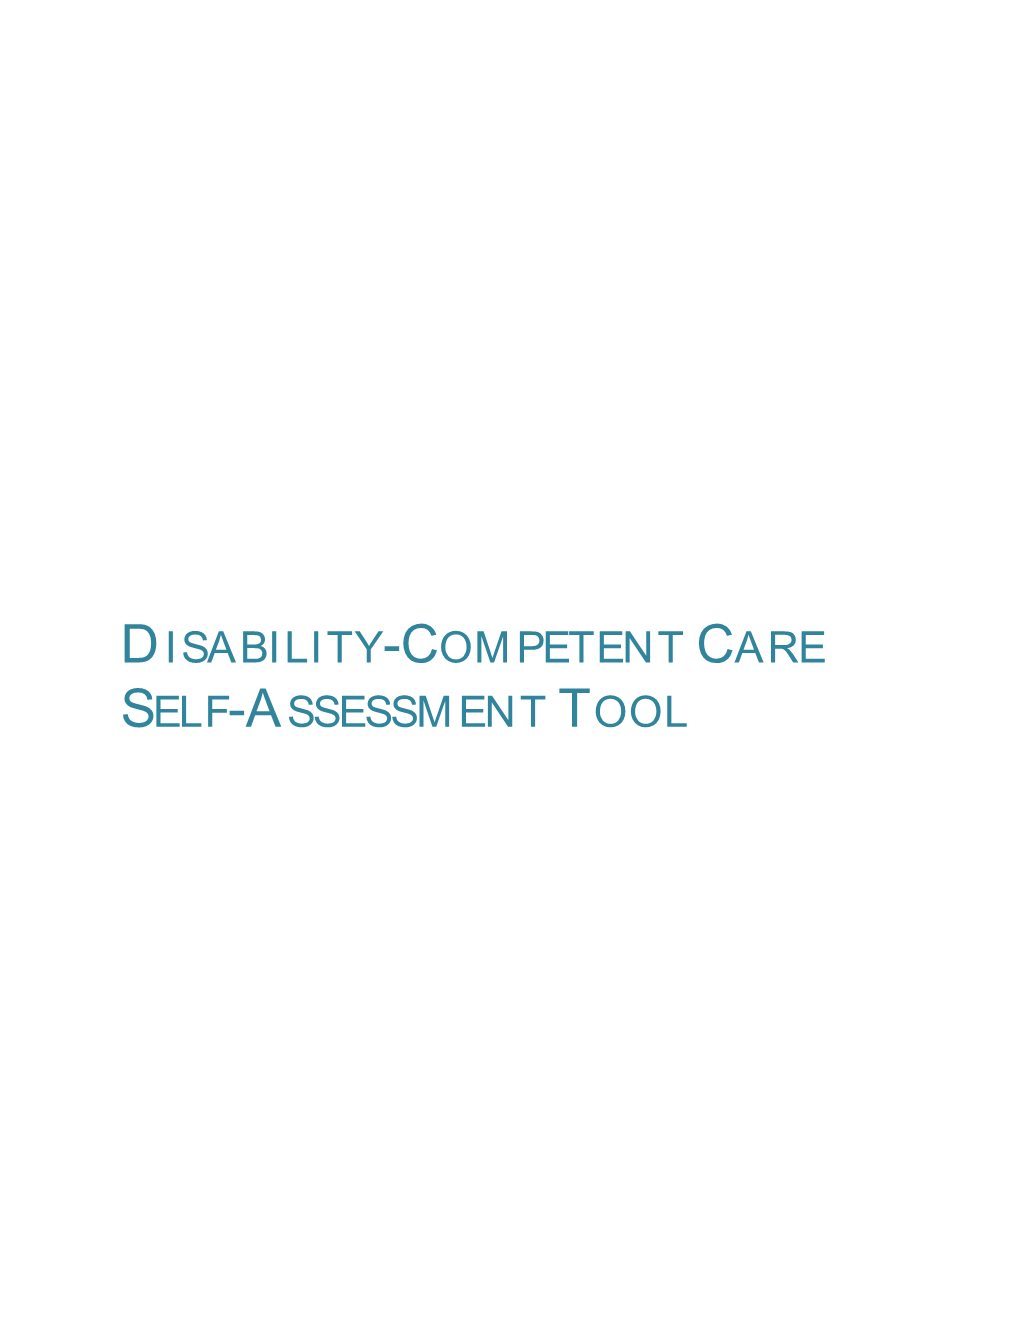 Disability-Competent Care Self-Assessment Tool